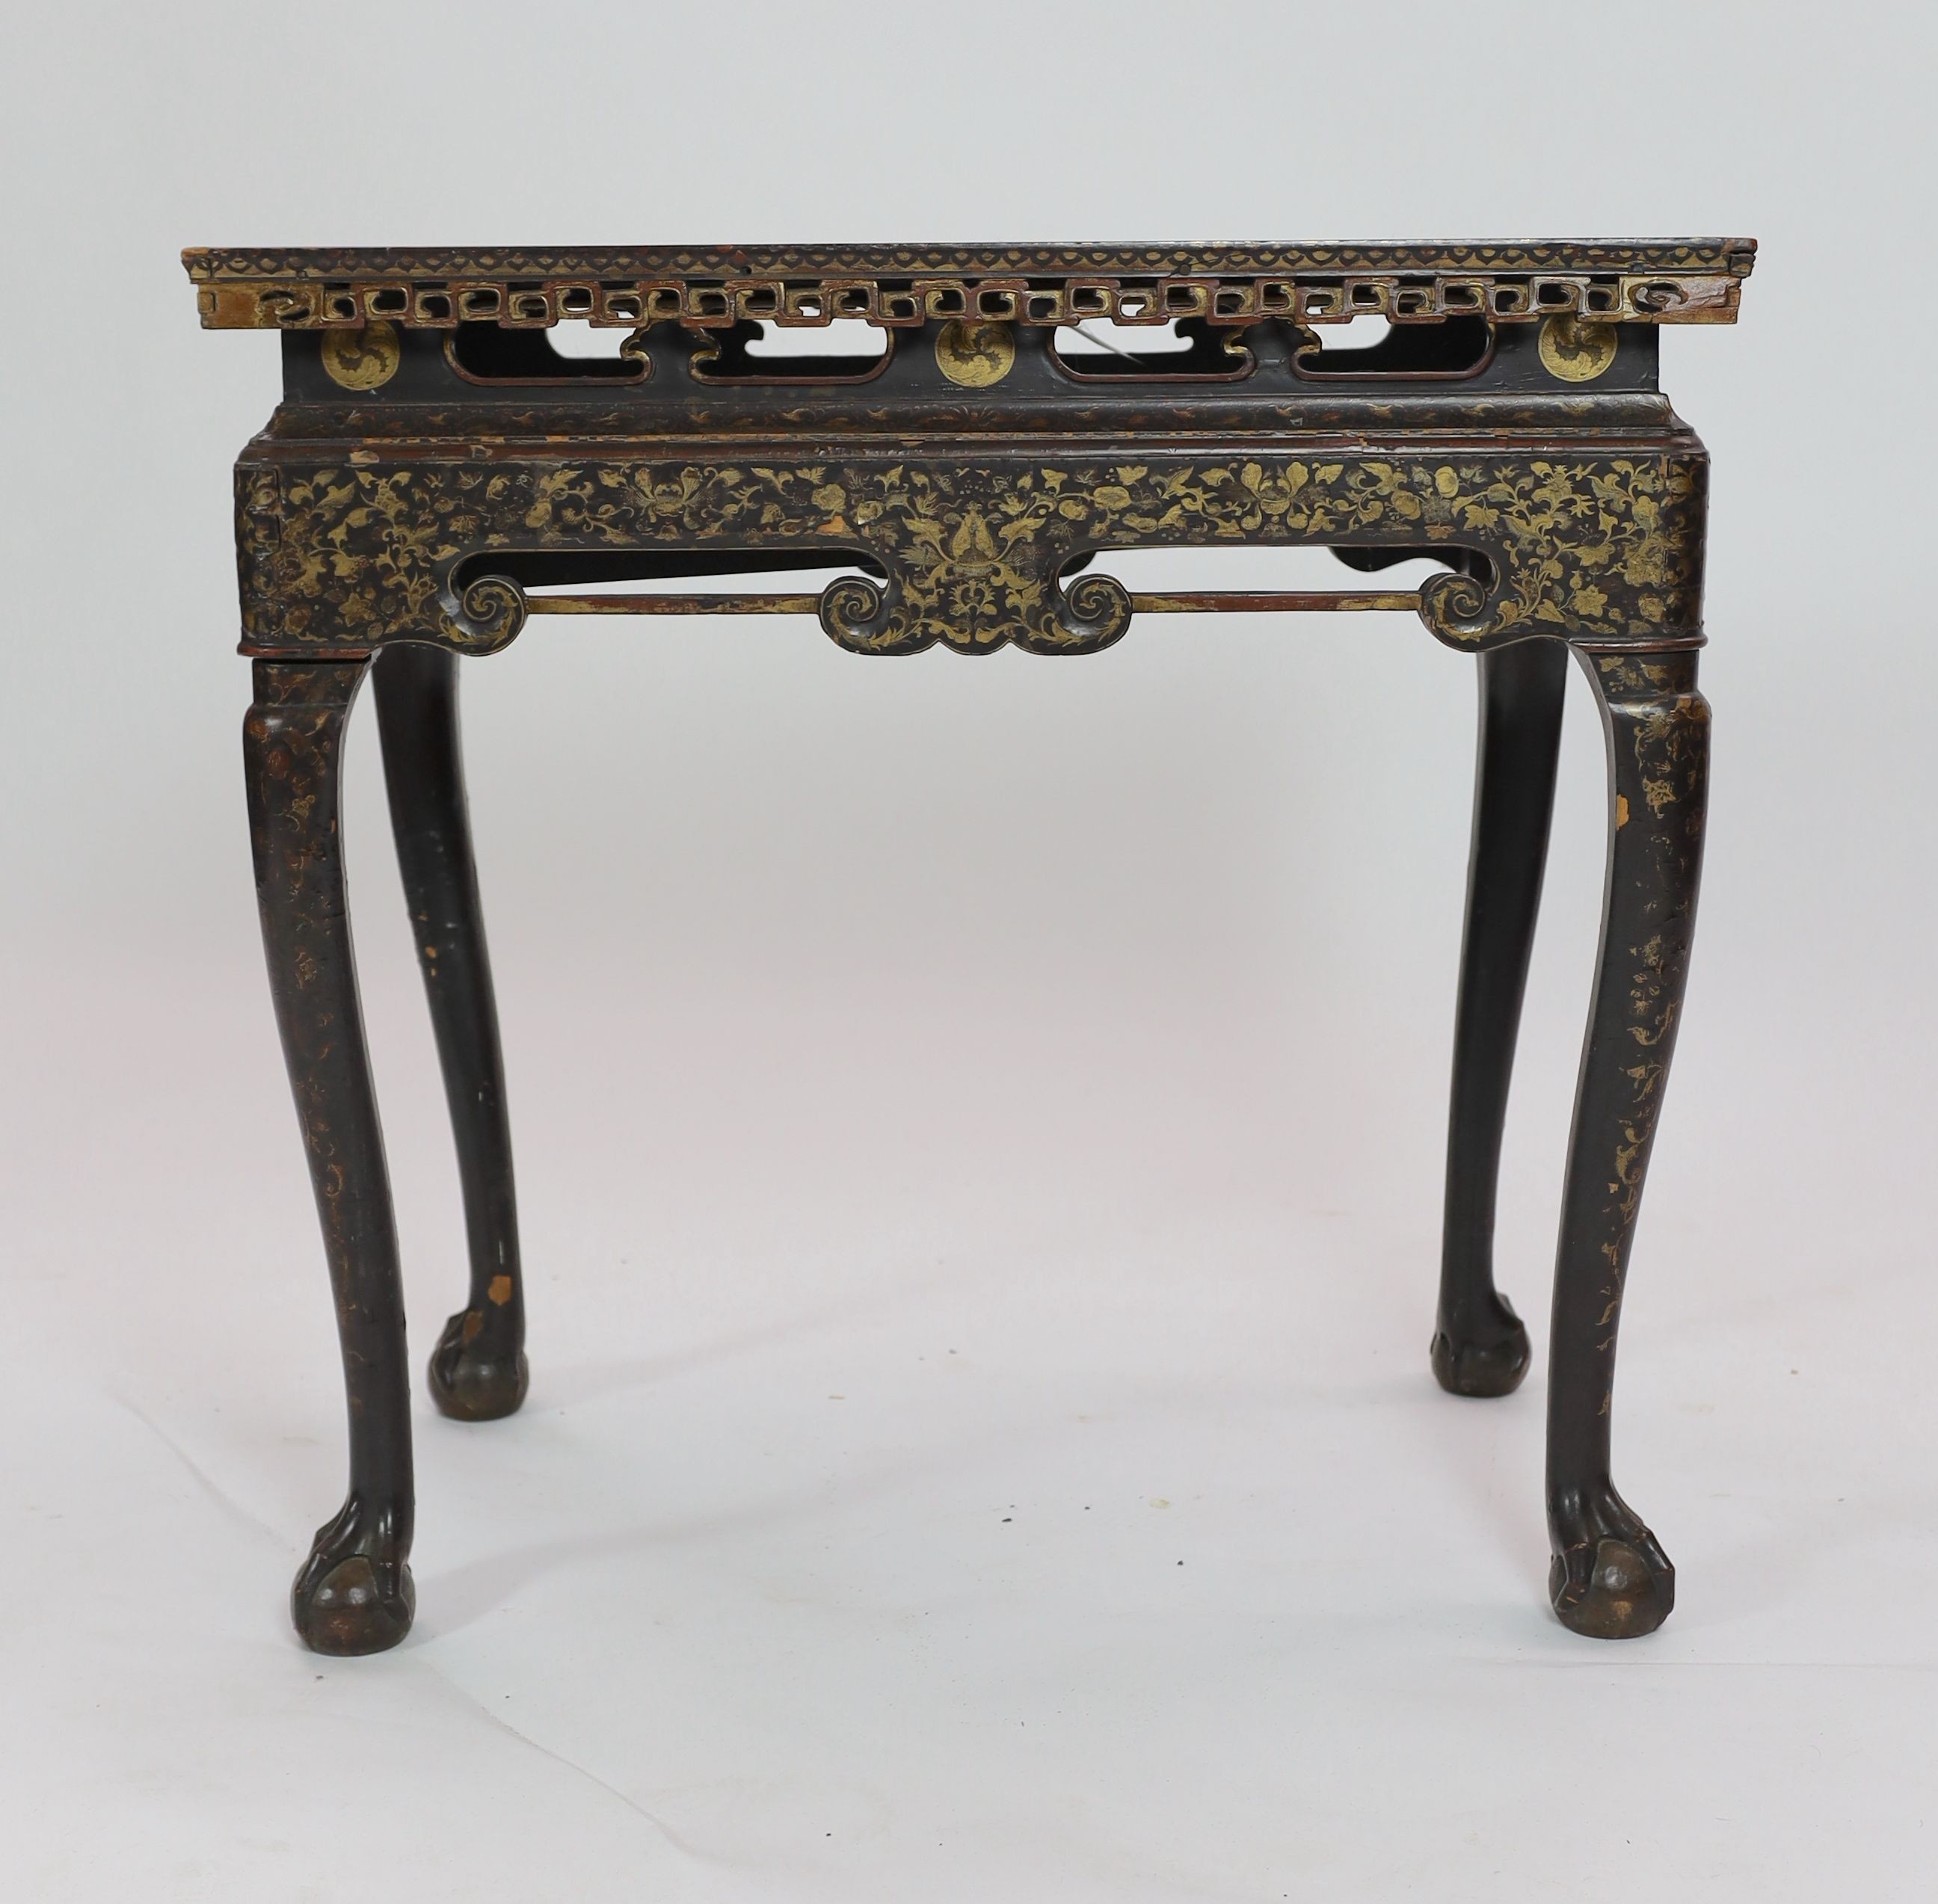 A Chinese export black lacquer and parcel-gilt stand, second half 18th Century, width 78cm, depth 48cm, height 74cm